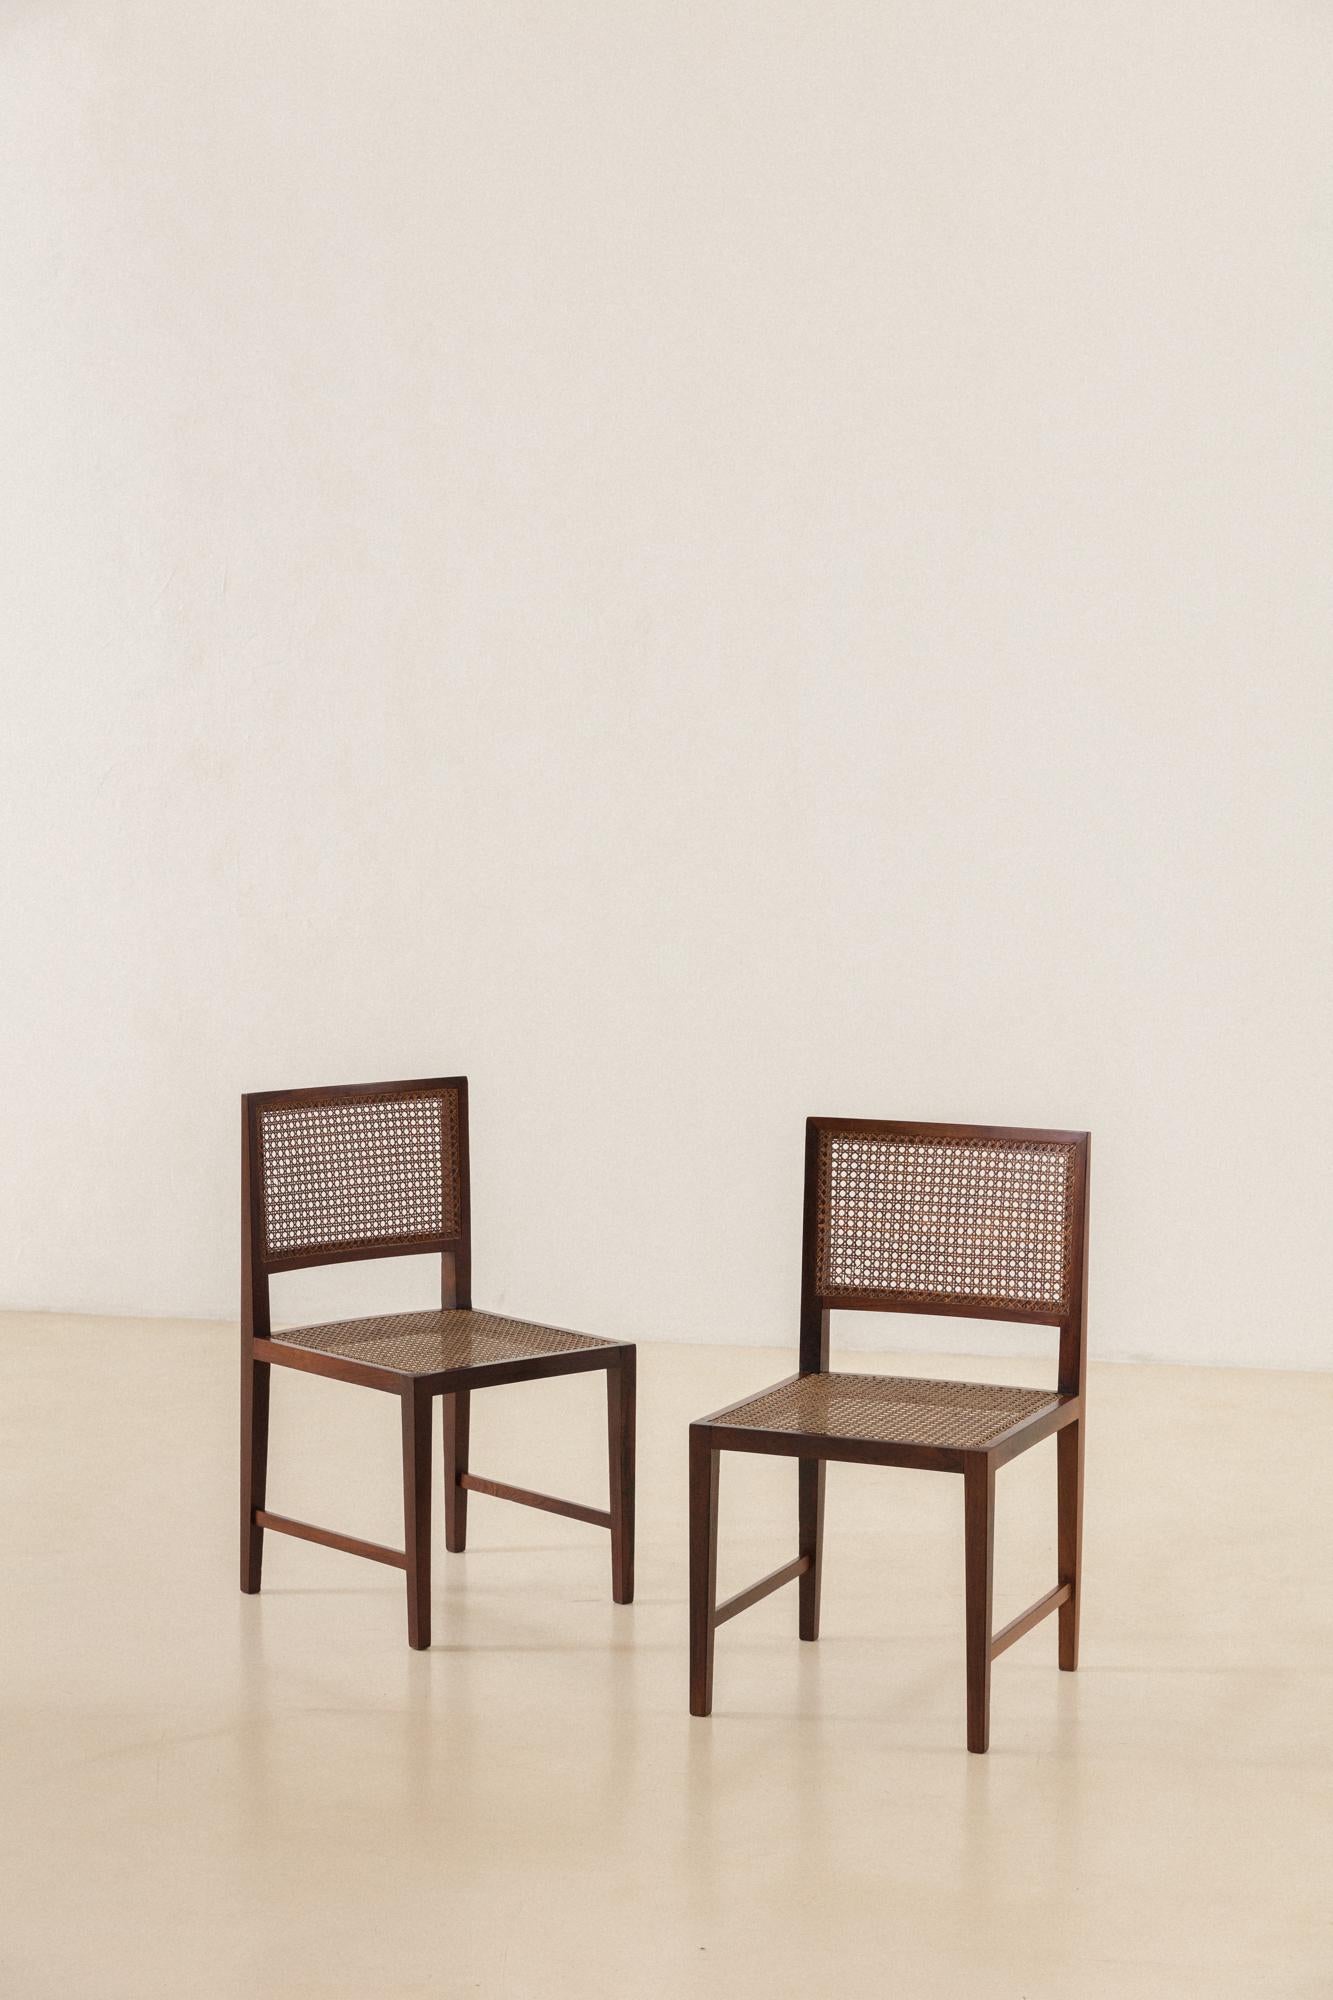 Rosewood and Cane Dining Chairs, M.L. Magalhães, 1960s, Midcentury Brazilian 3